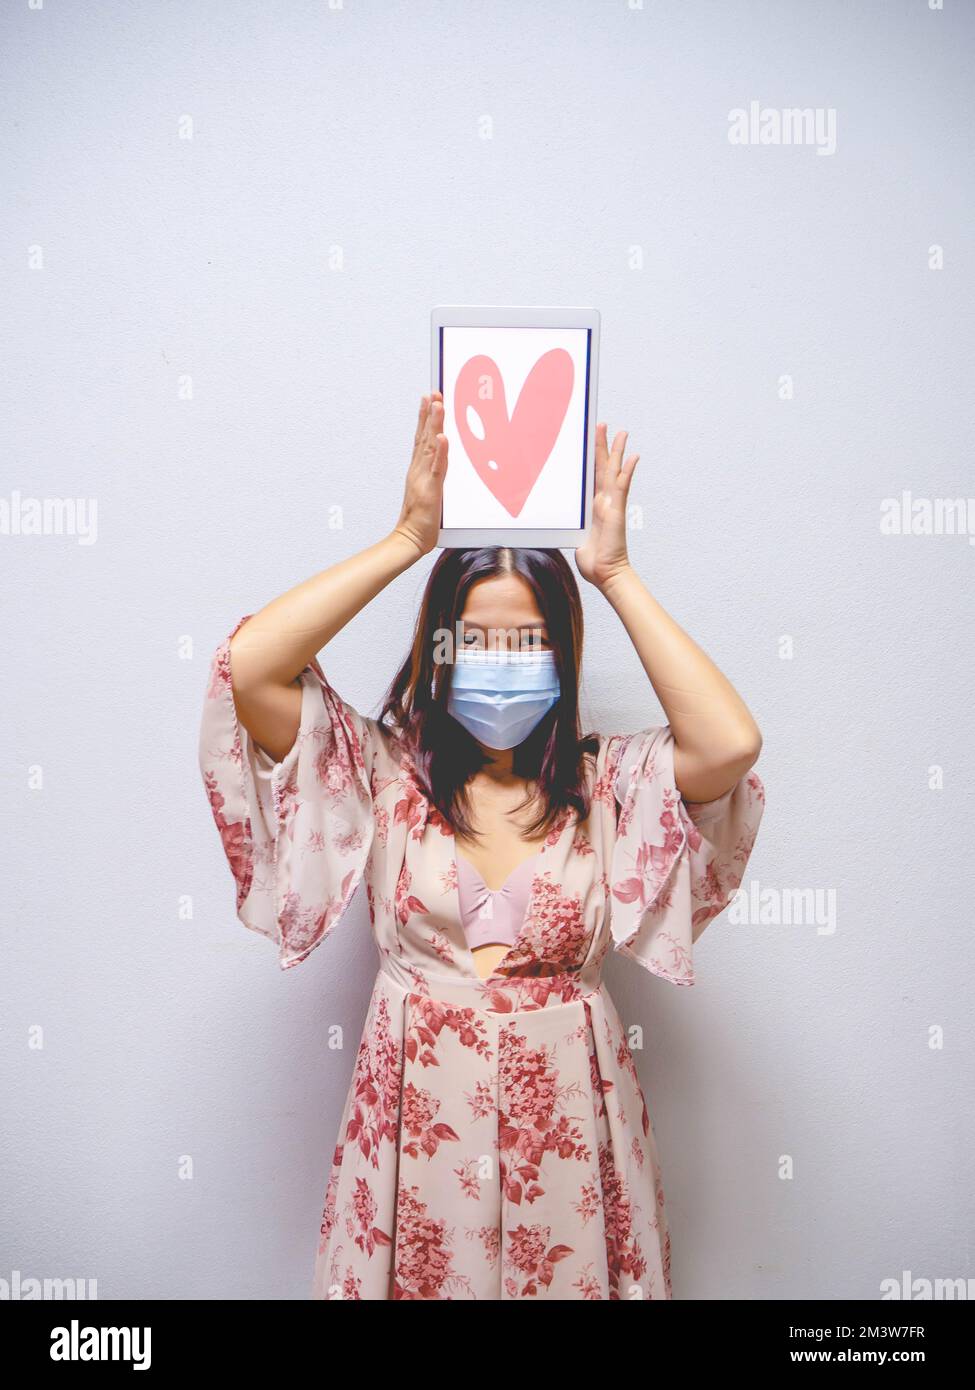 A woman wearing a mask and holding a heart shaped tablet. Stock Photo